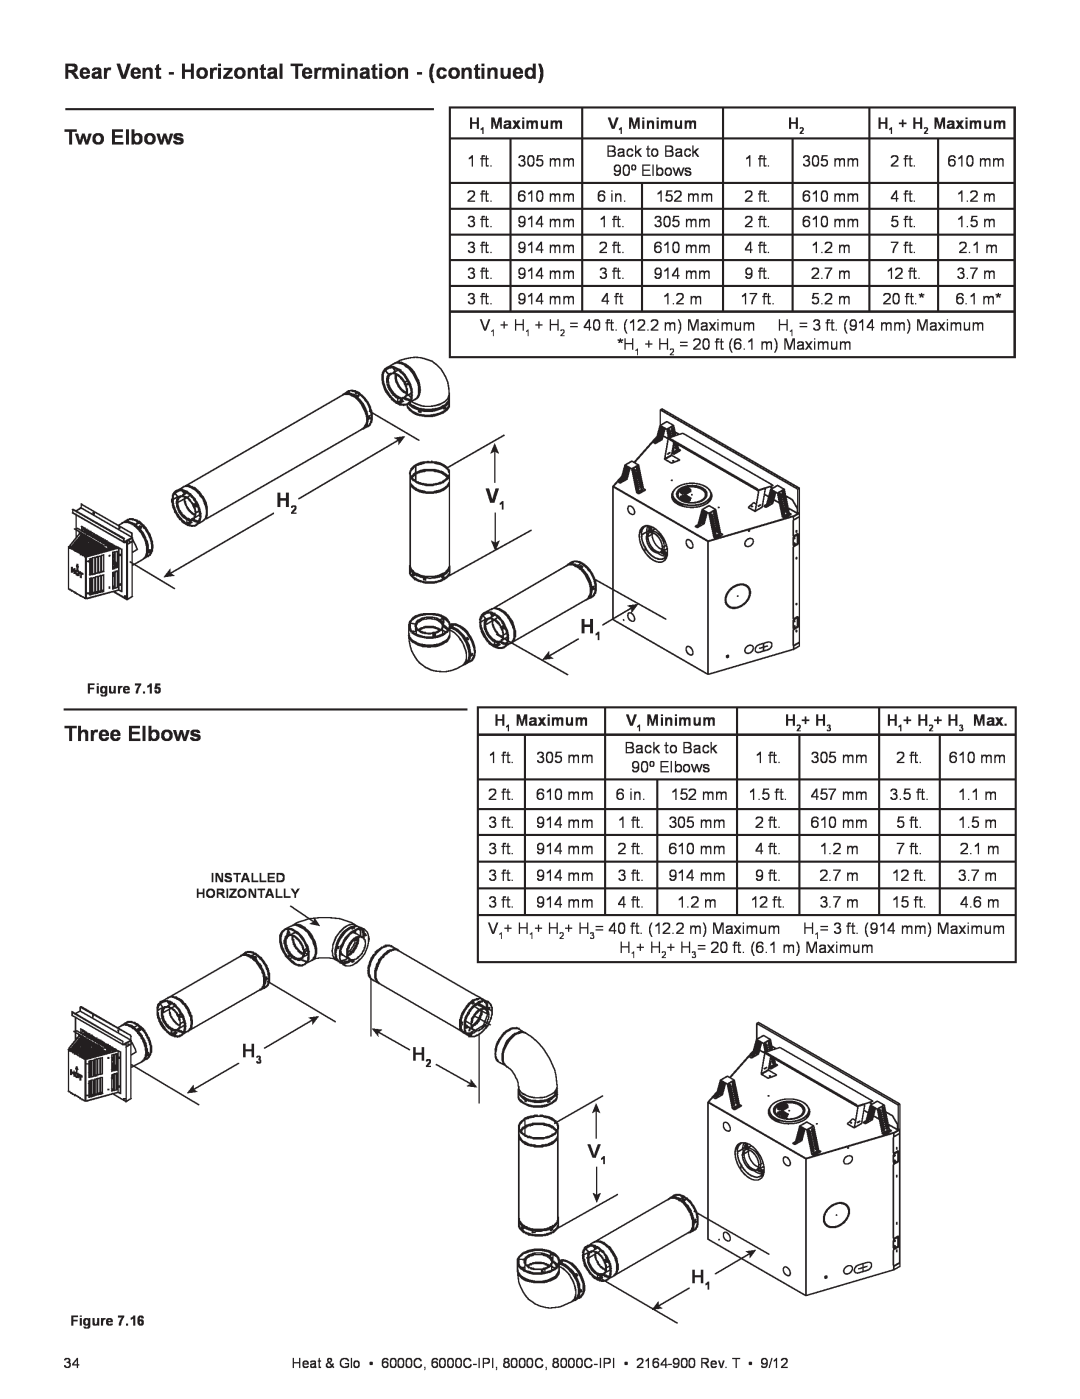 Heat & Glo LifeStyle 6000C manual Rear Vent - Horizontal Termination - continued, Two Elbows, Three Elbows, V1 H1 